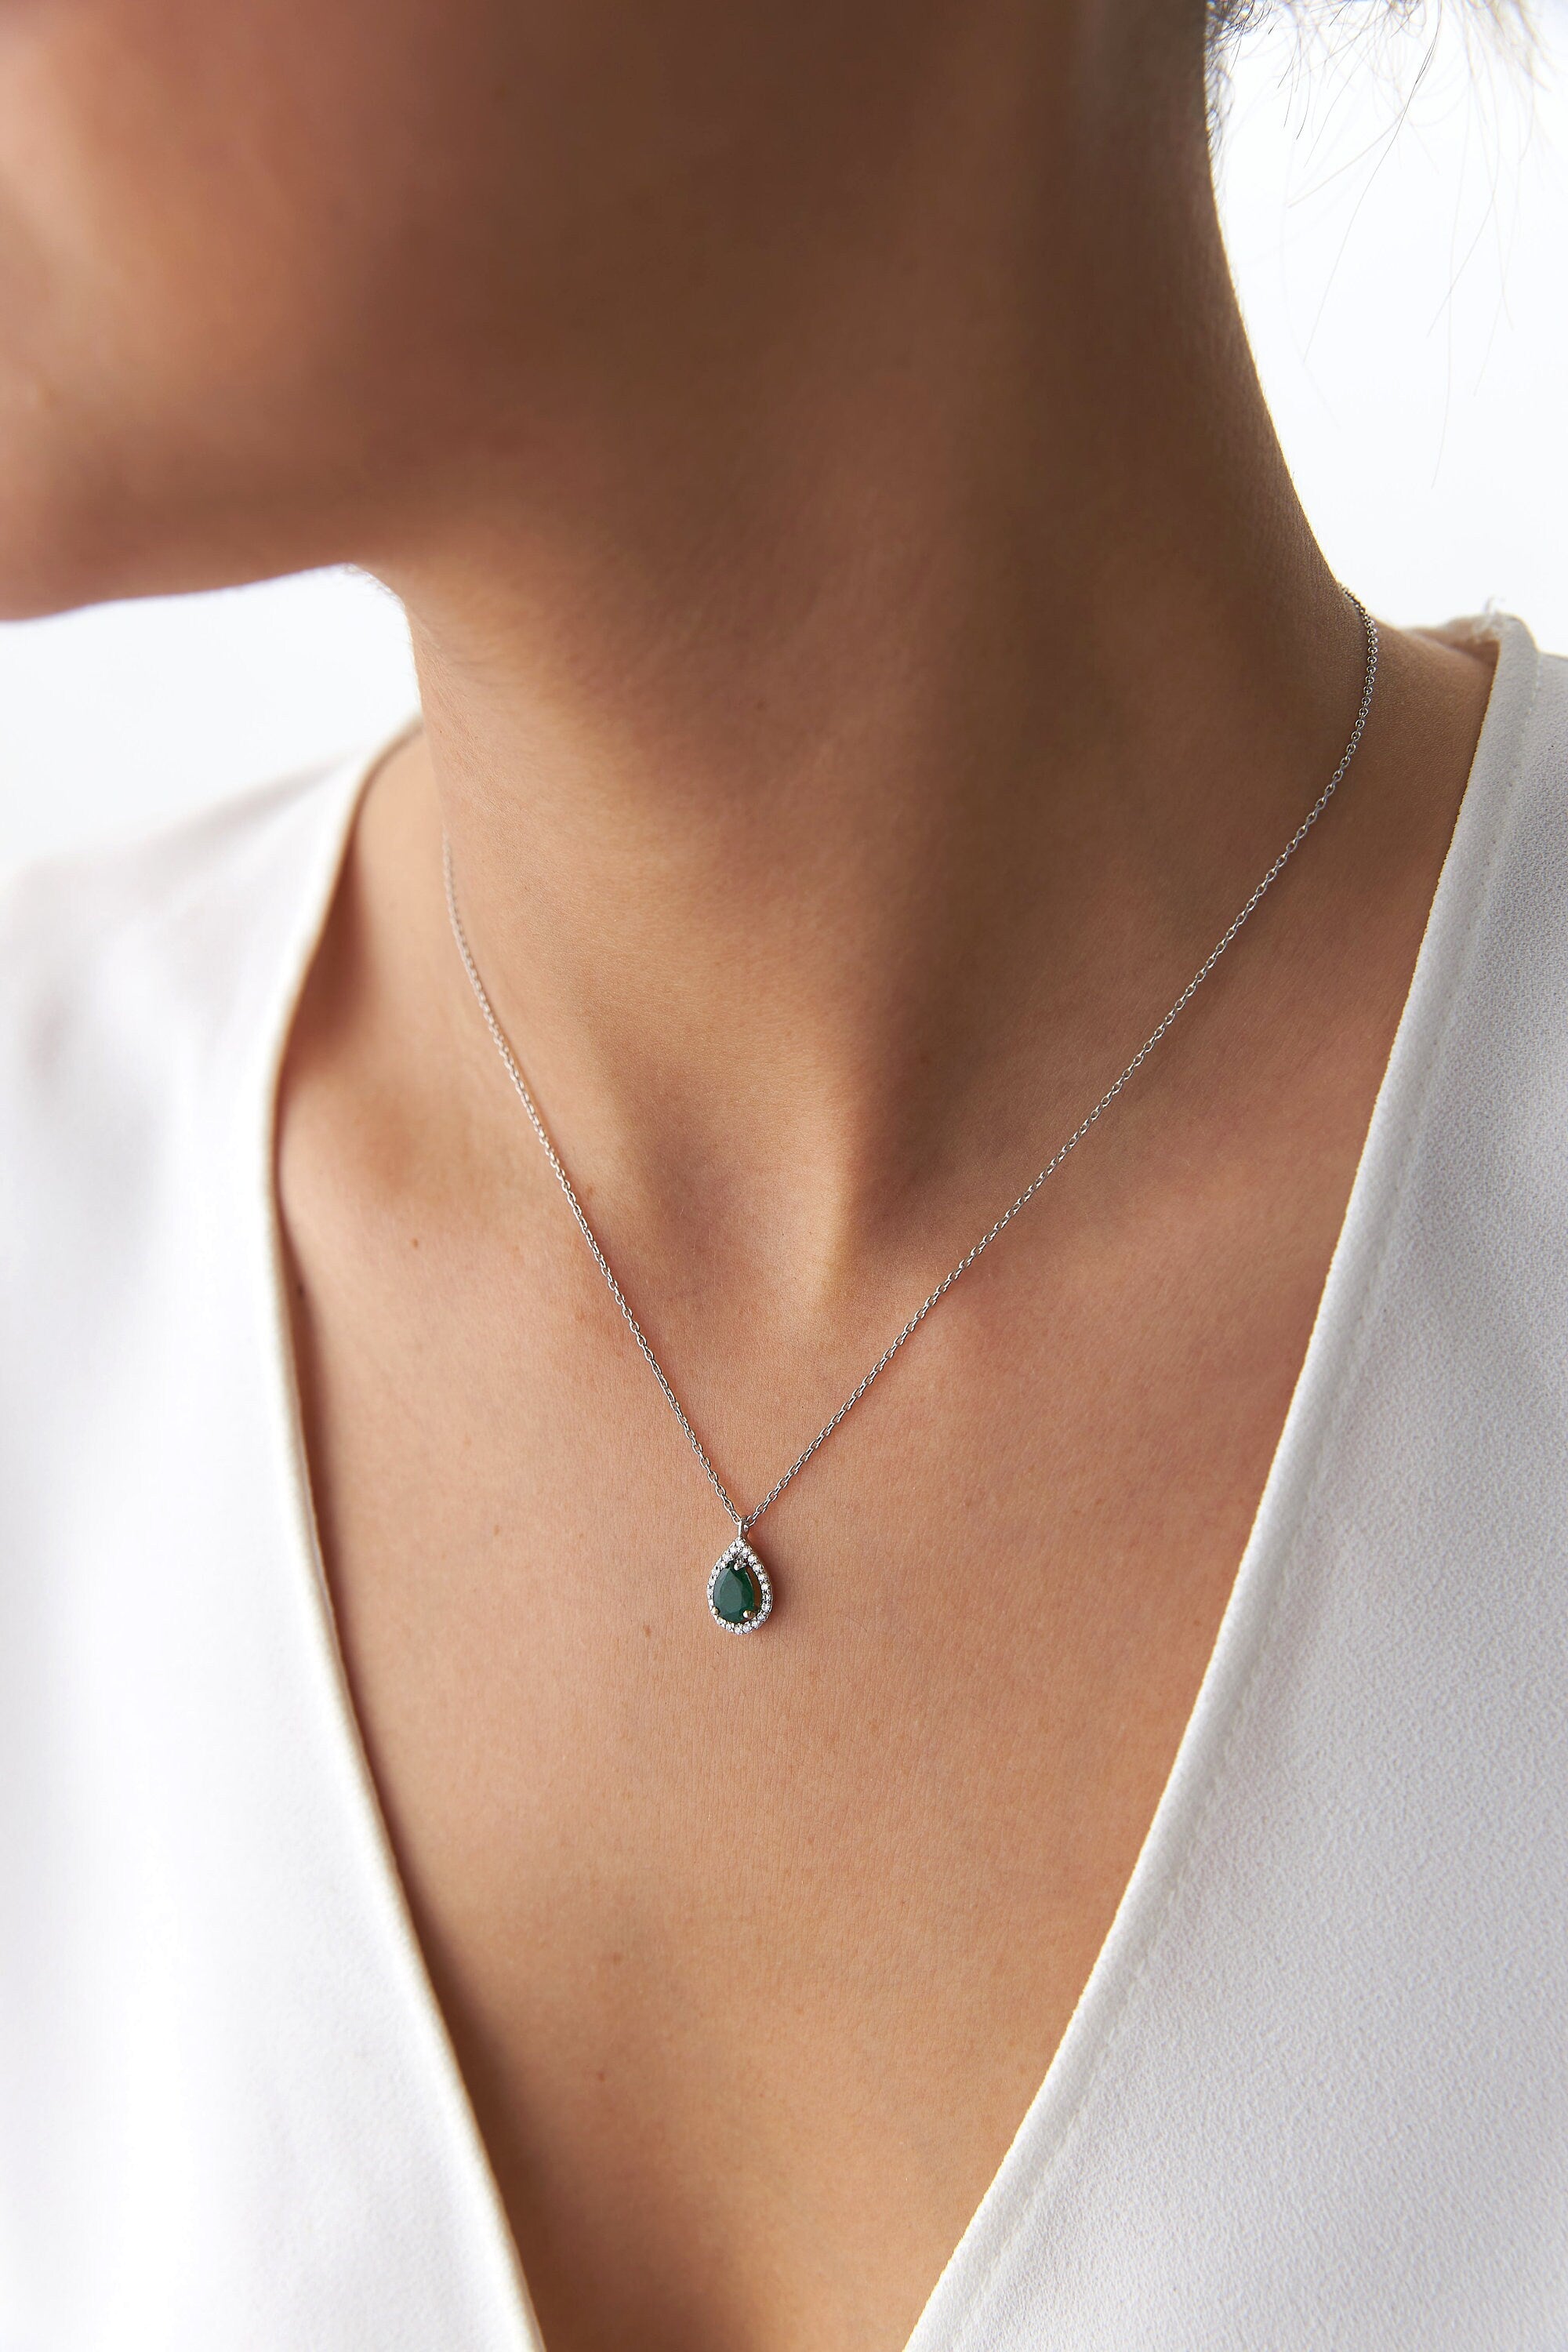 14K Gold Emerald and Diamond Necklace